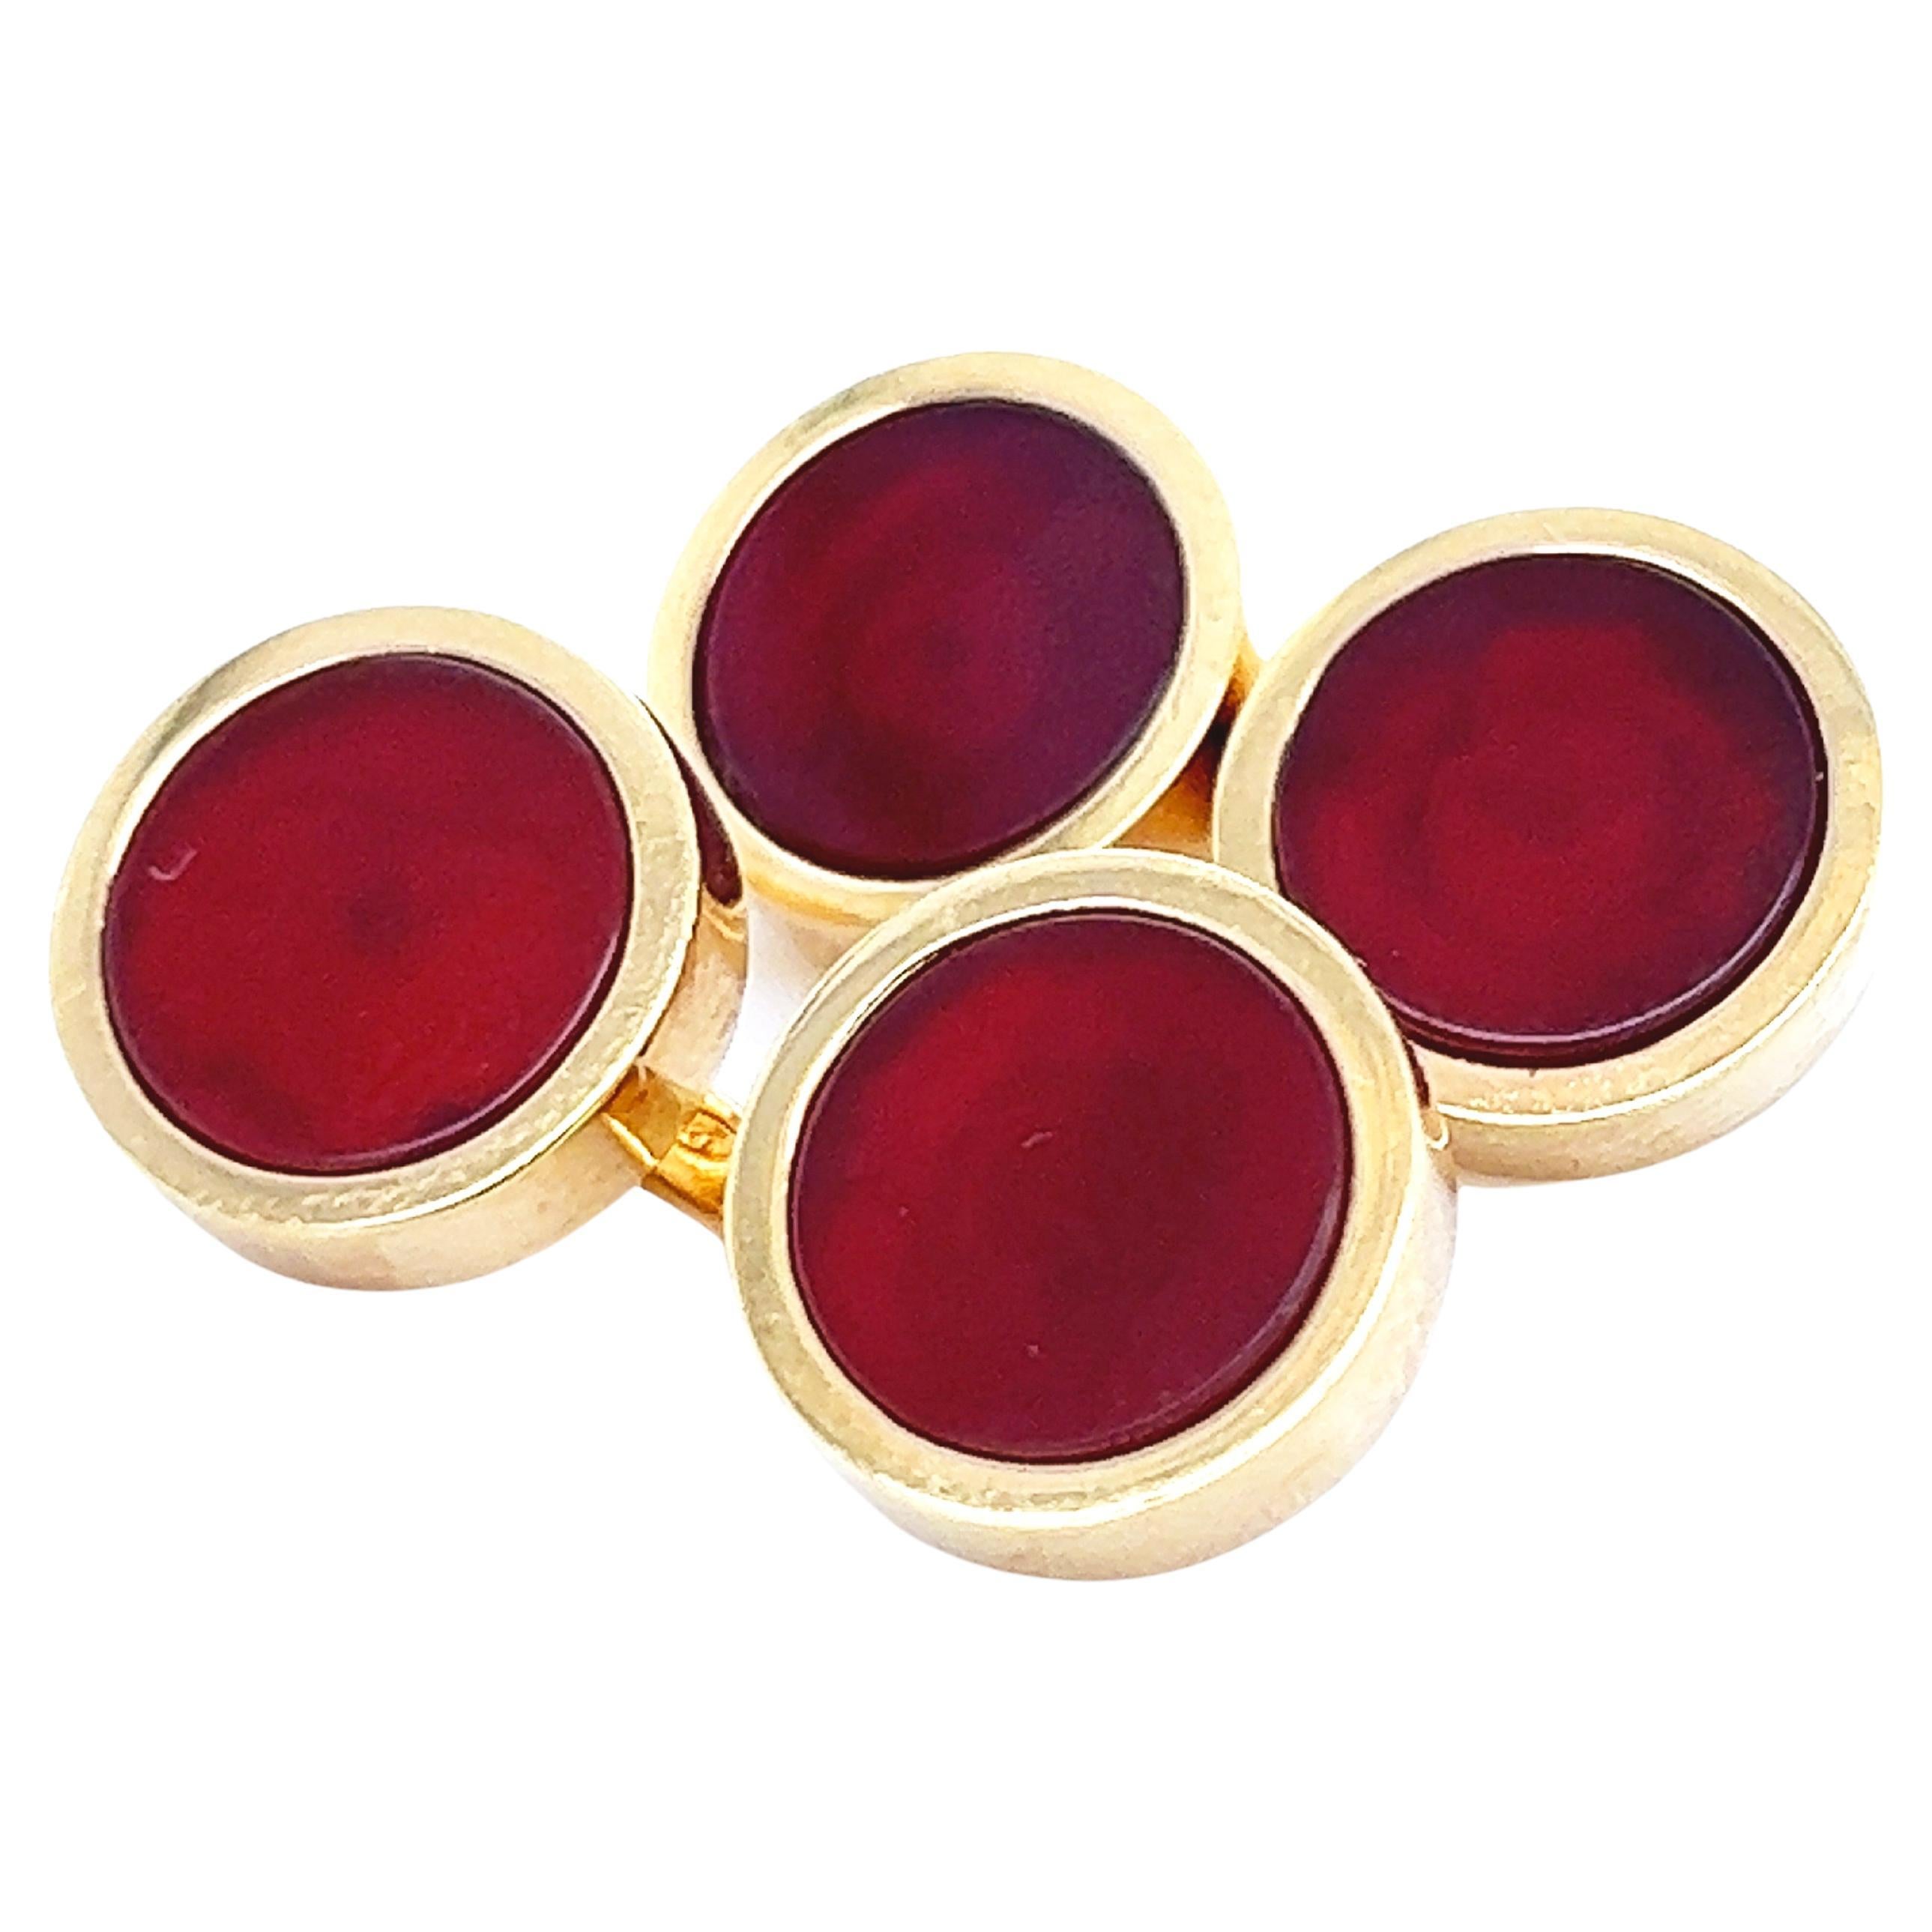 Berca Red Carnelian Disk Round Shaped Sterling Silver Gold Plated Cufflinks